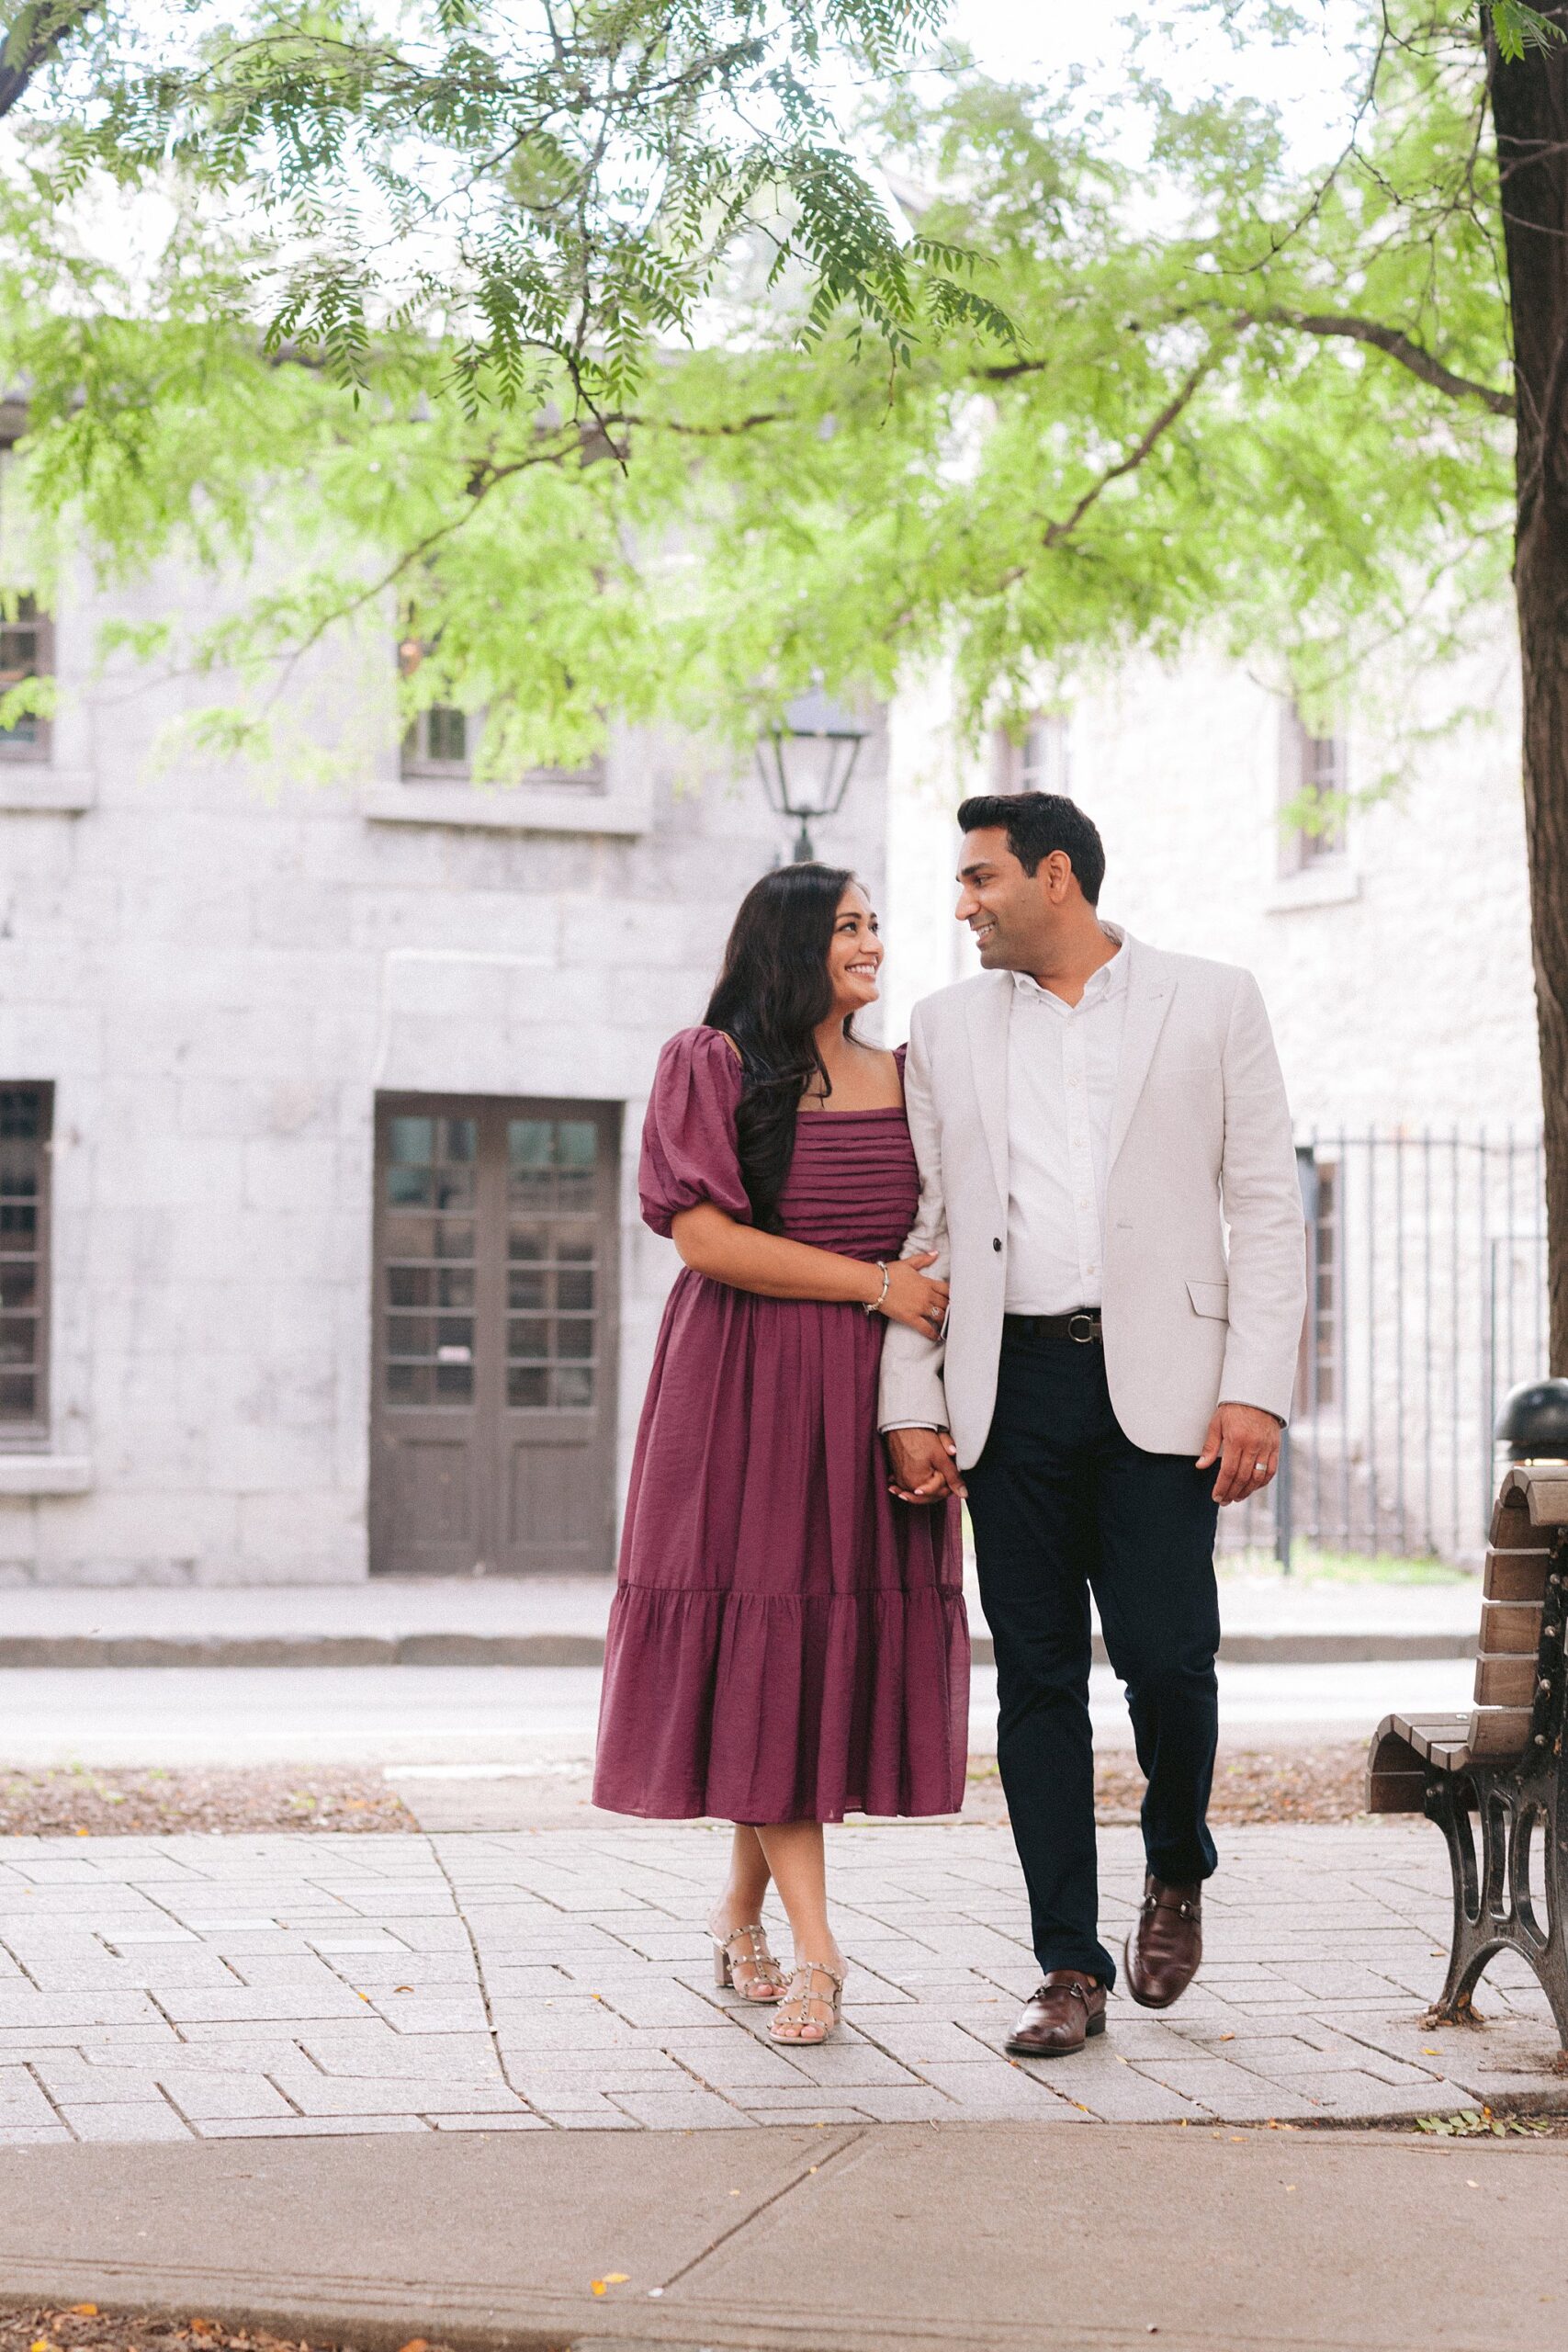 From Montreal, with love: Their captivating engagement journey